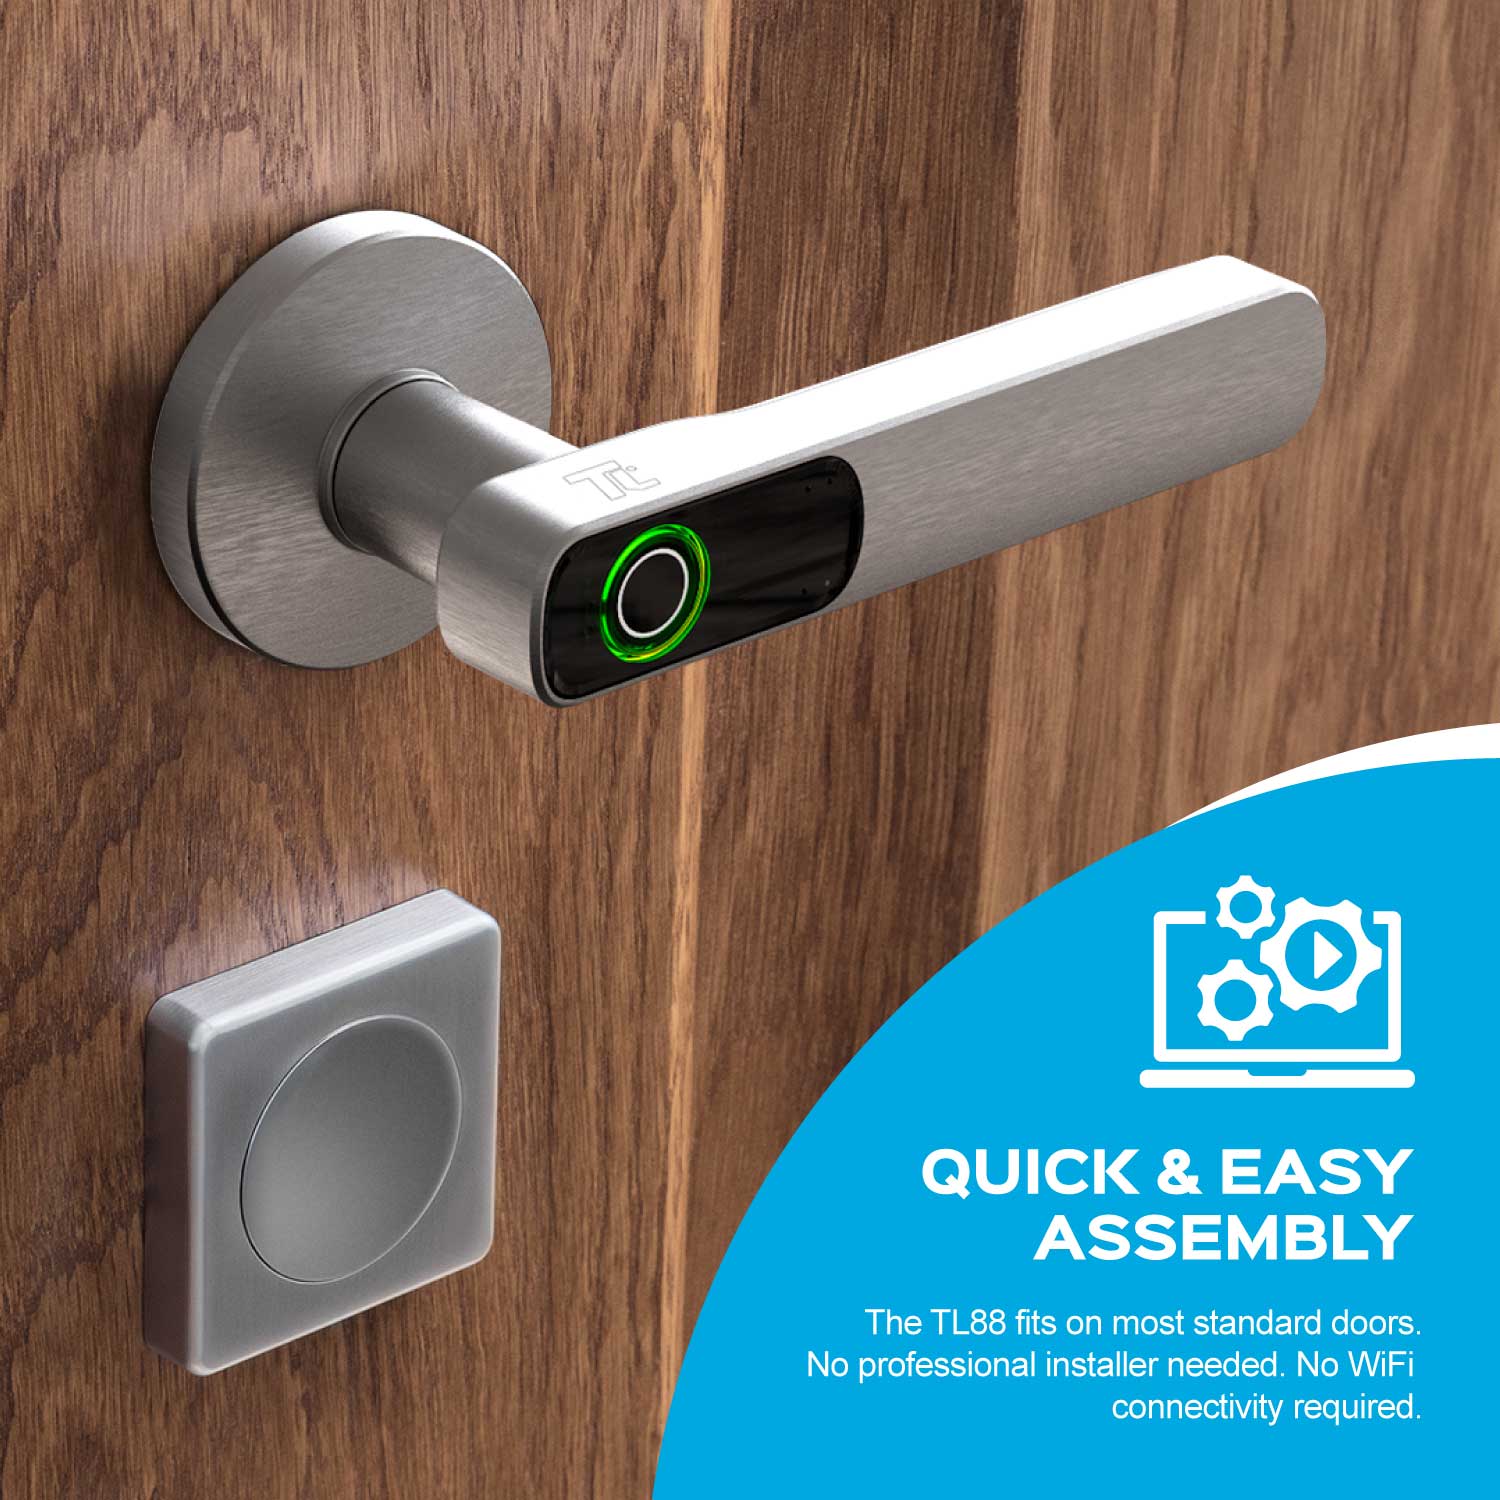 TURBOLOCK TL88 App-Enabled Fingerprint Smart Door Lever Handle Lock One-Touch Security Solution for Home or Office - image 5 of 6